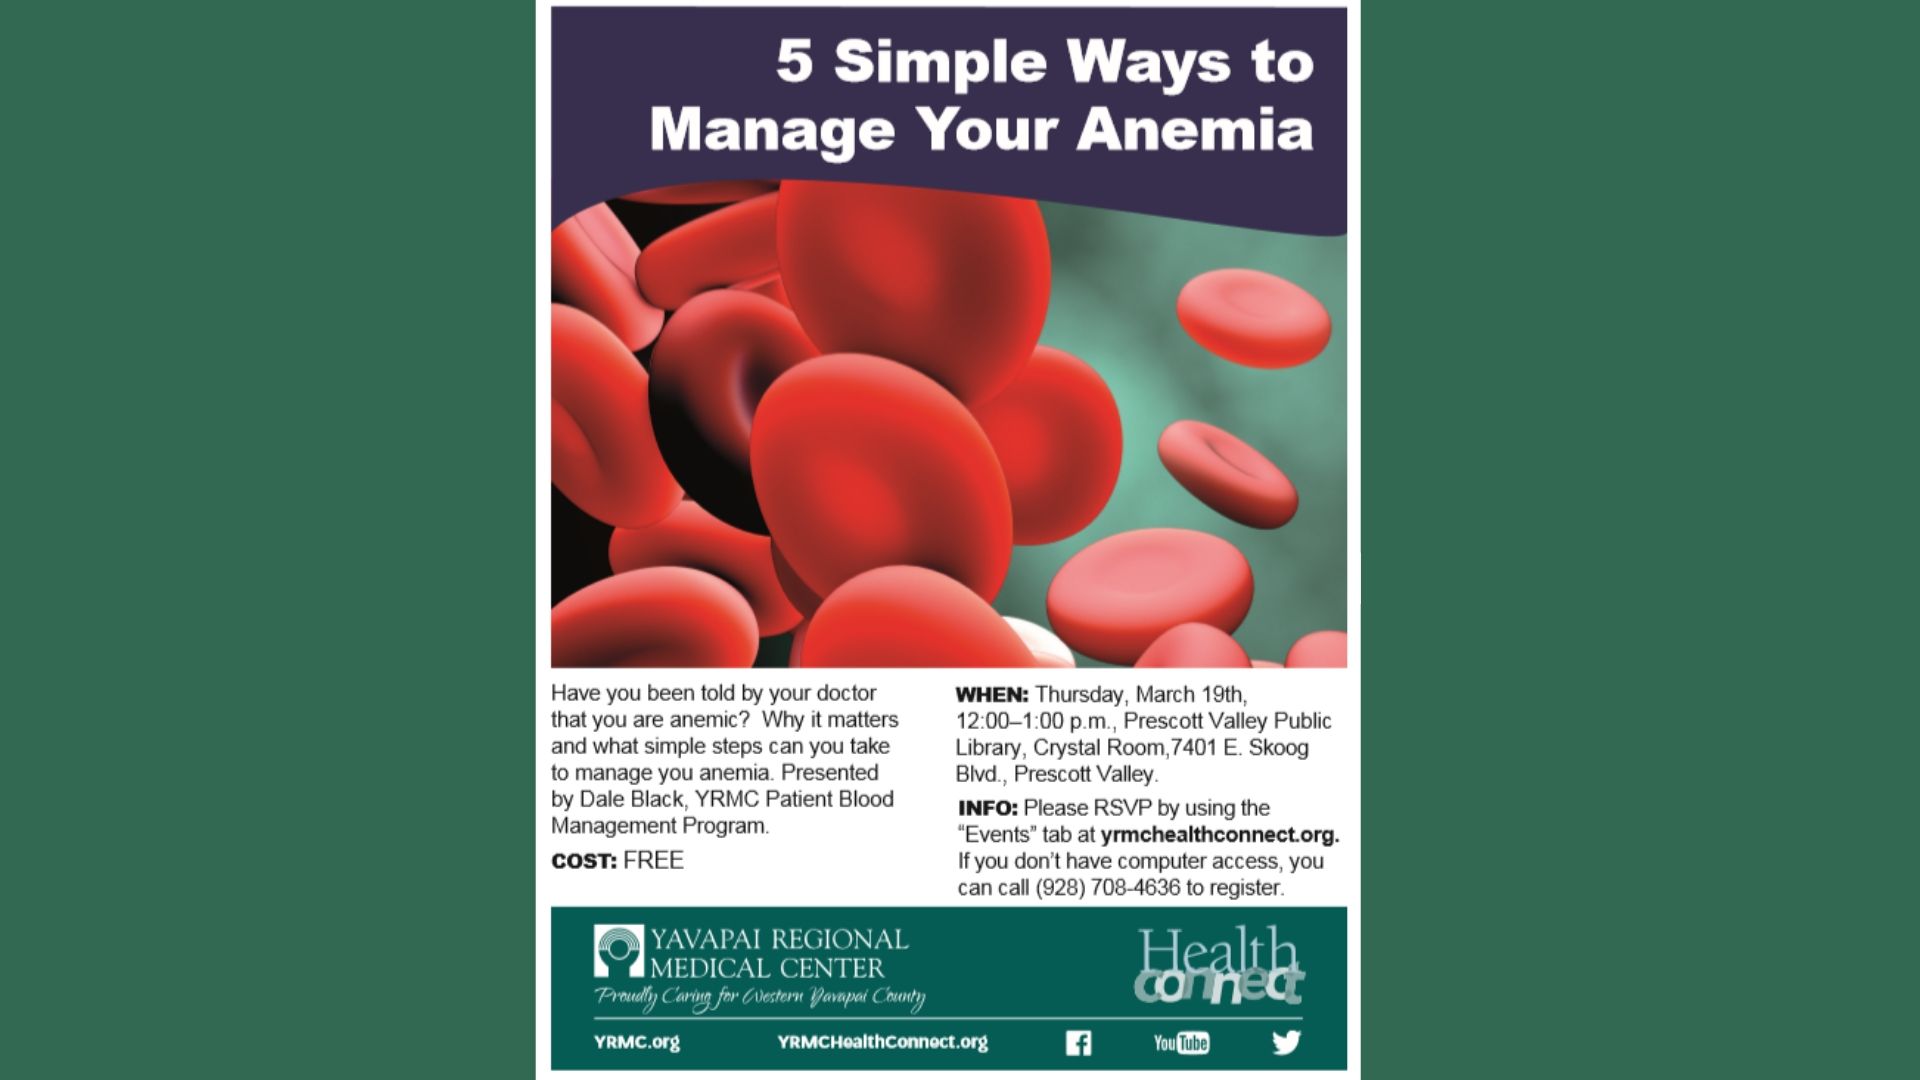 YRMC Program ‘5 Simple Ways to Manage Your Anemia’ - Registration Required 